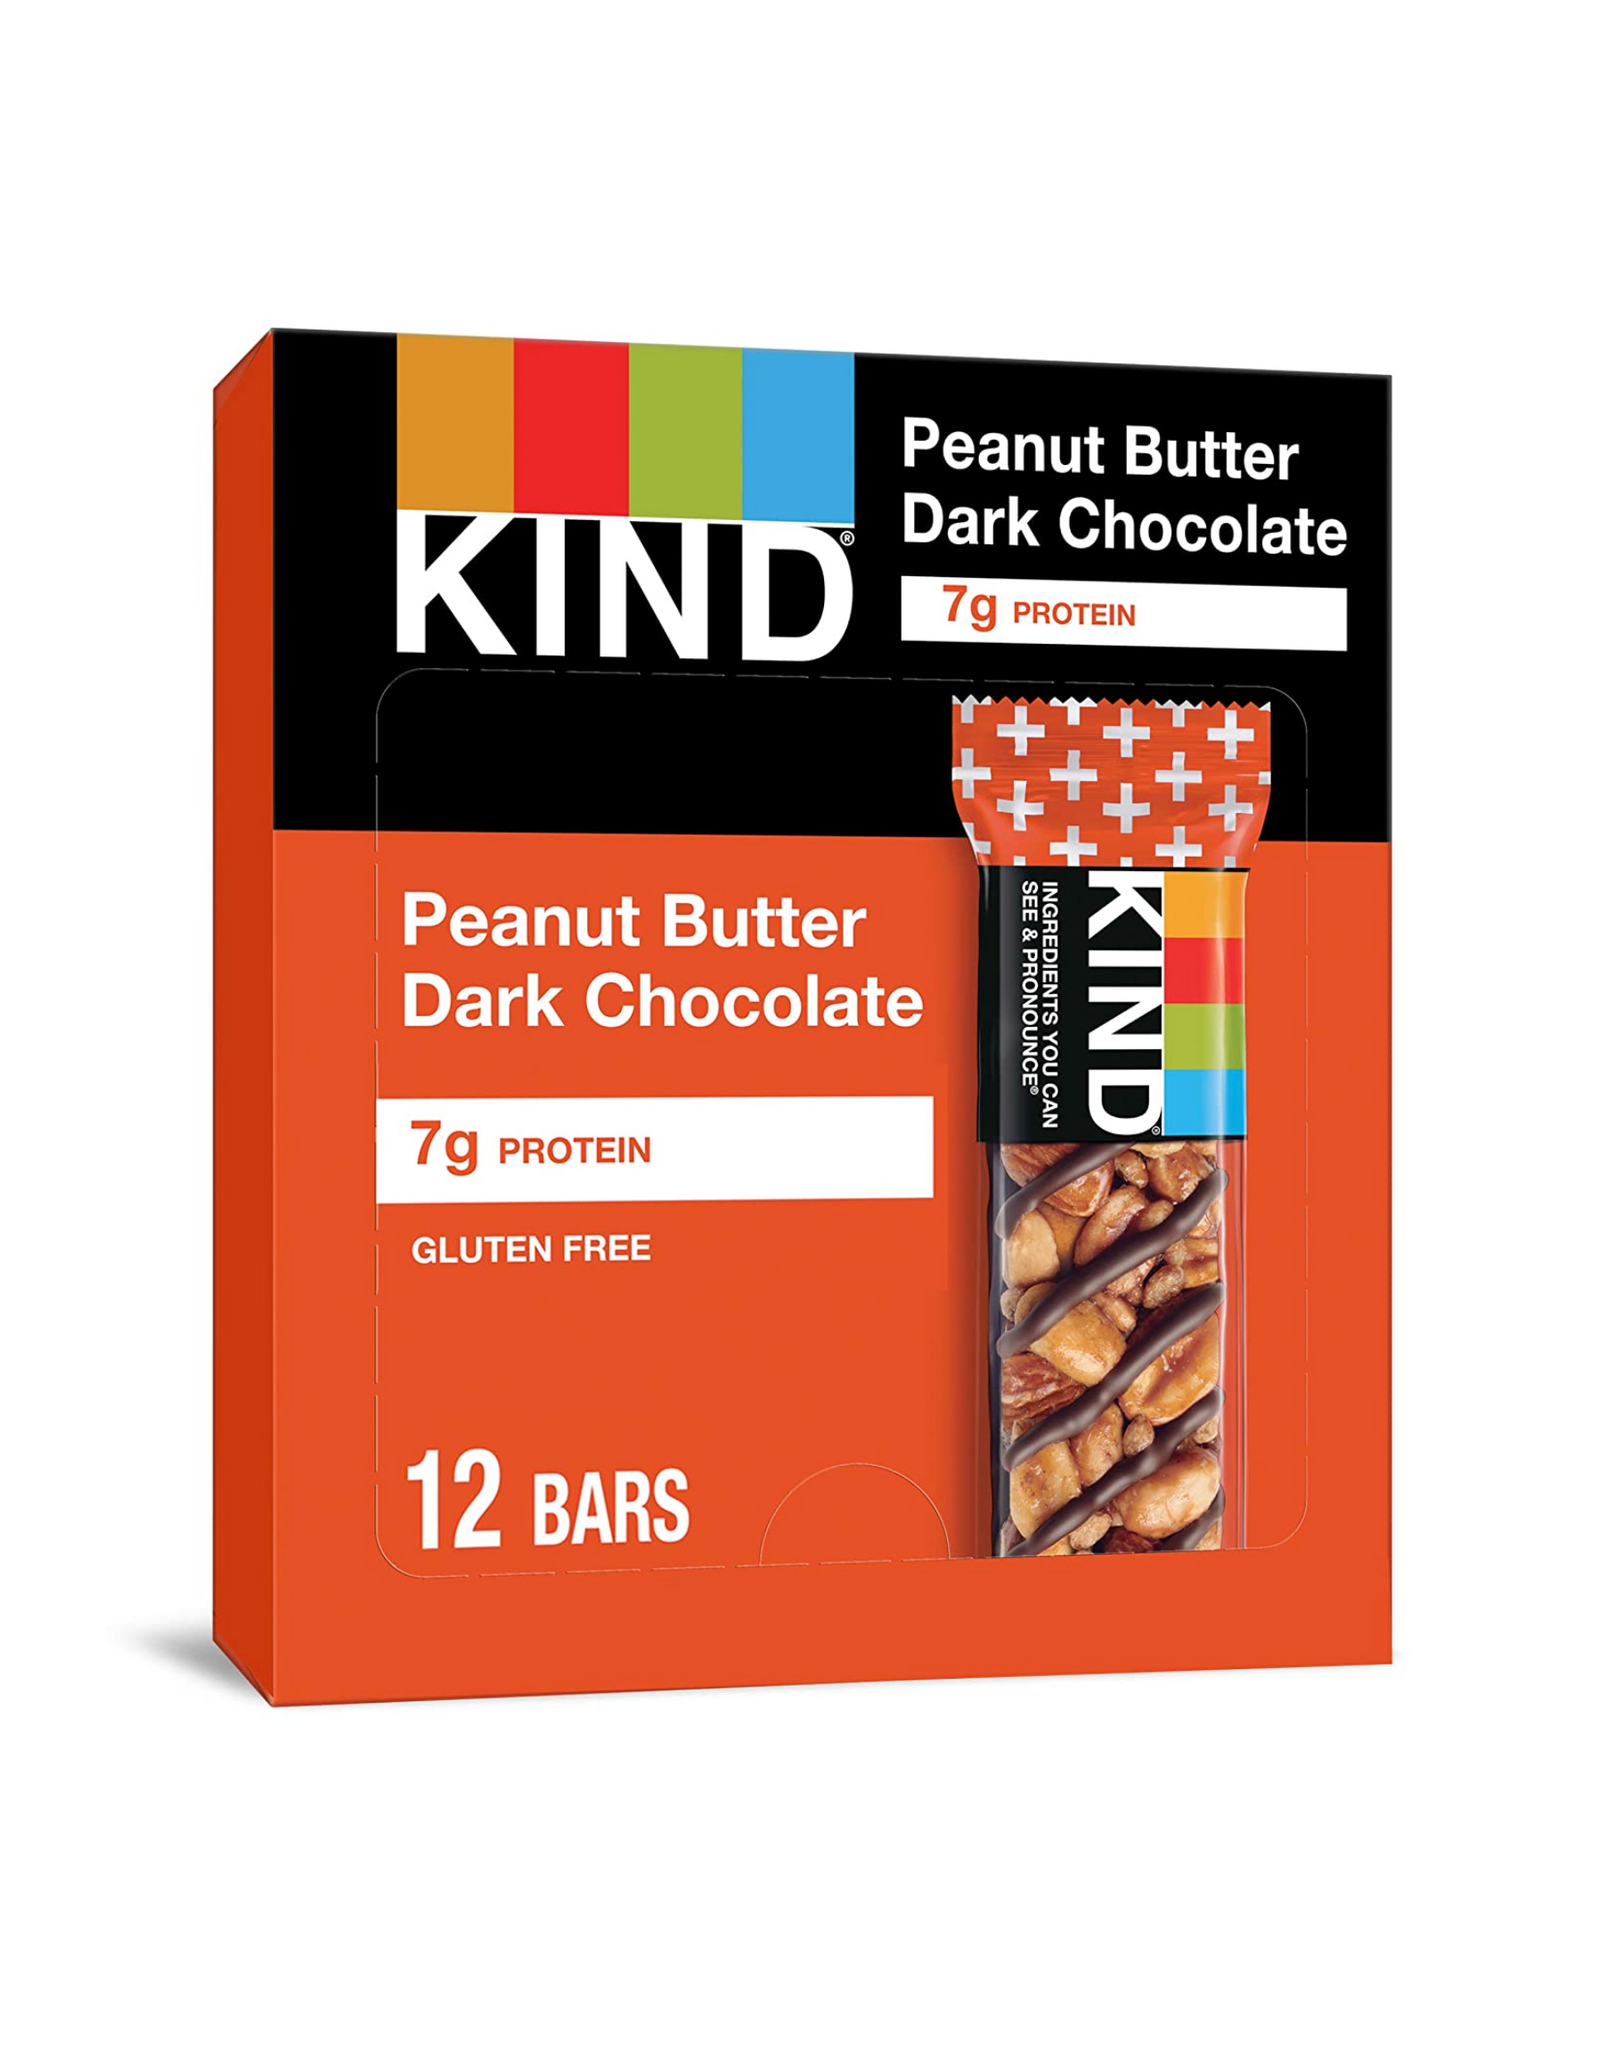 KIND Bars, Peanut Butter Dark Chocolate, Gluten Free, 7g Protein, 1.4 oz, 24 Ct in total (Pack of 2)